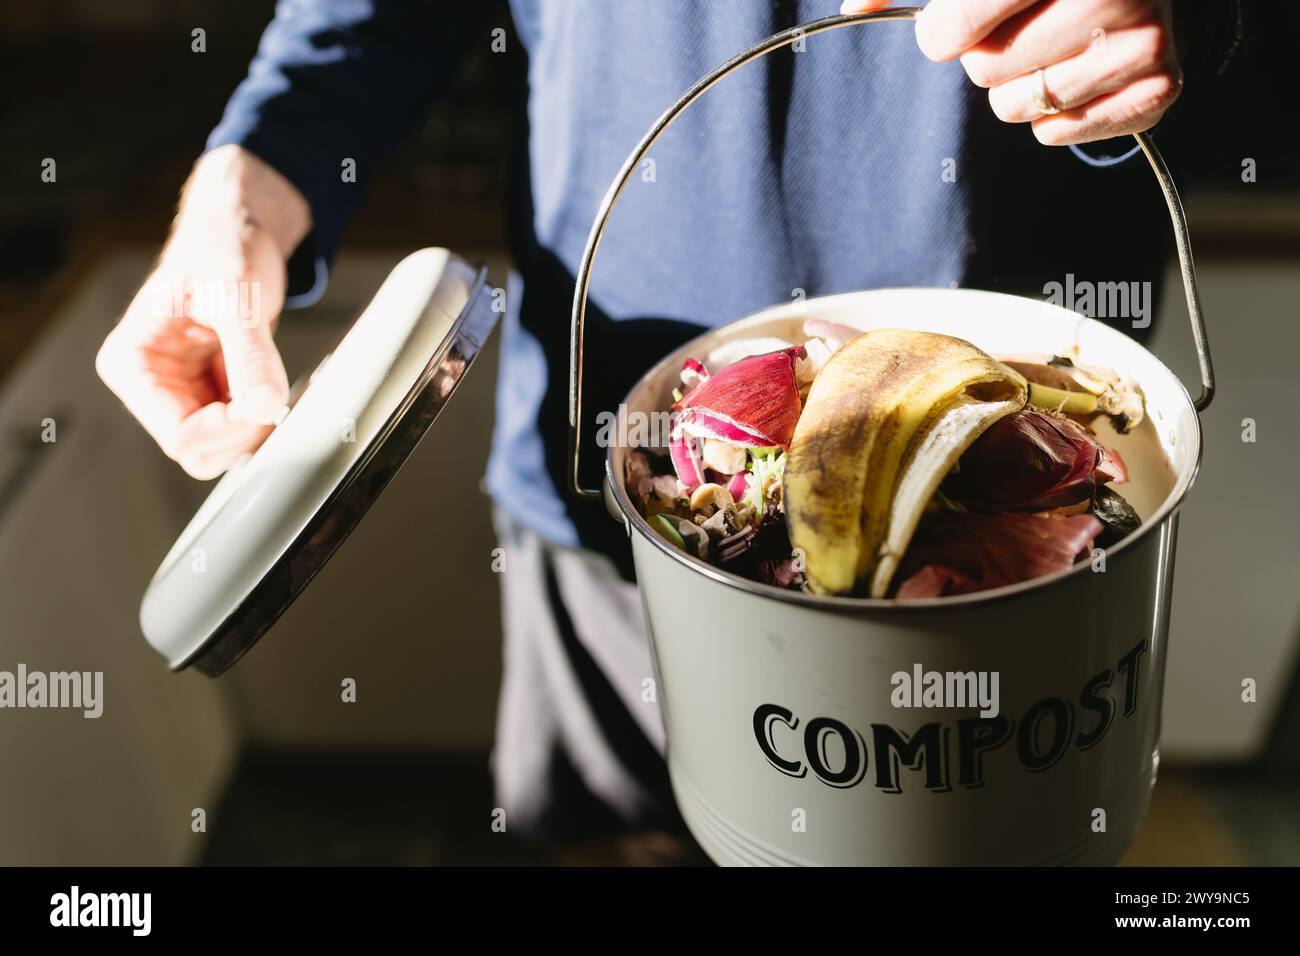 open compost bucket full of fruit and vegetable food scraps Stock Photo